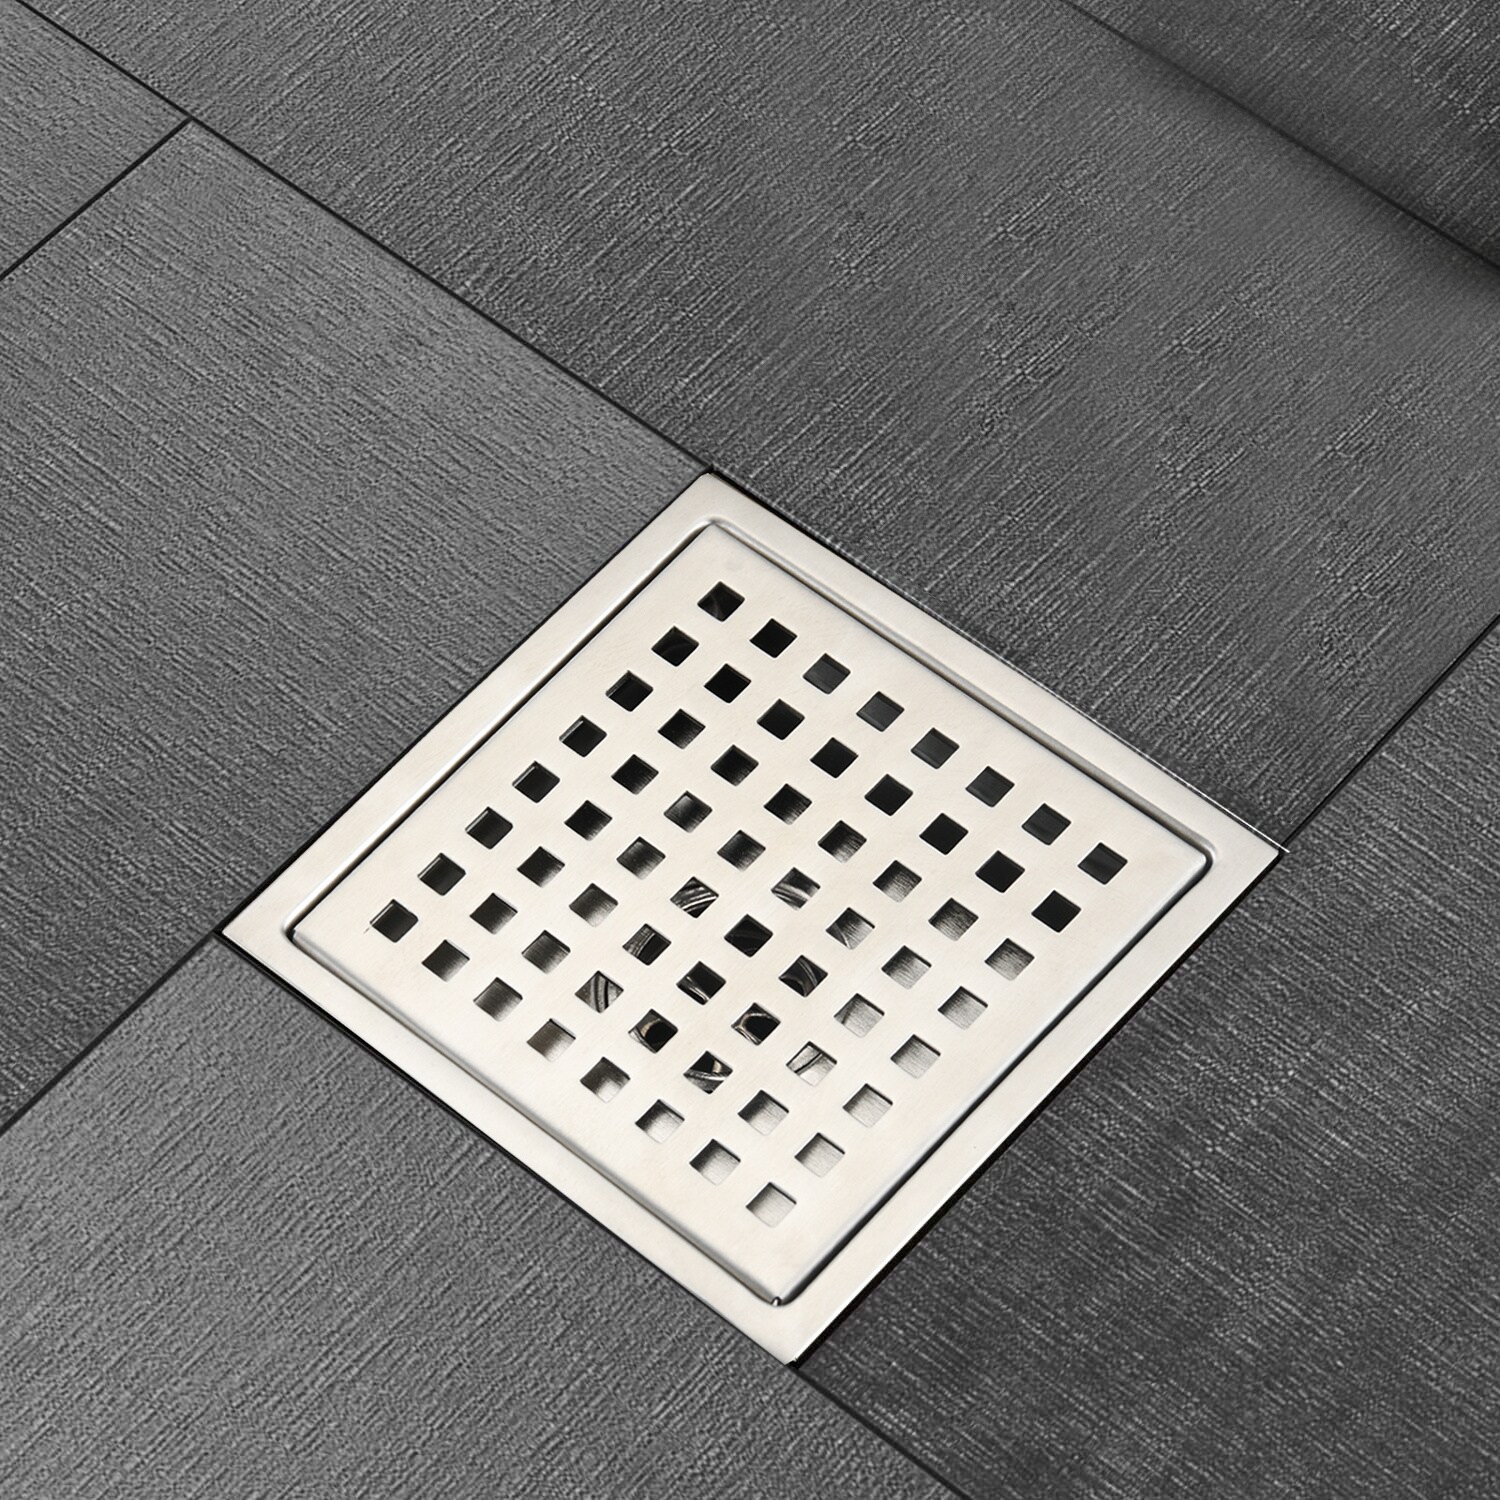 Maocao Hoom 6-in Square Shower Floor Drain in the Shower Drains